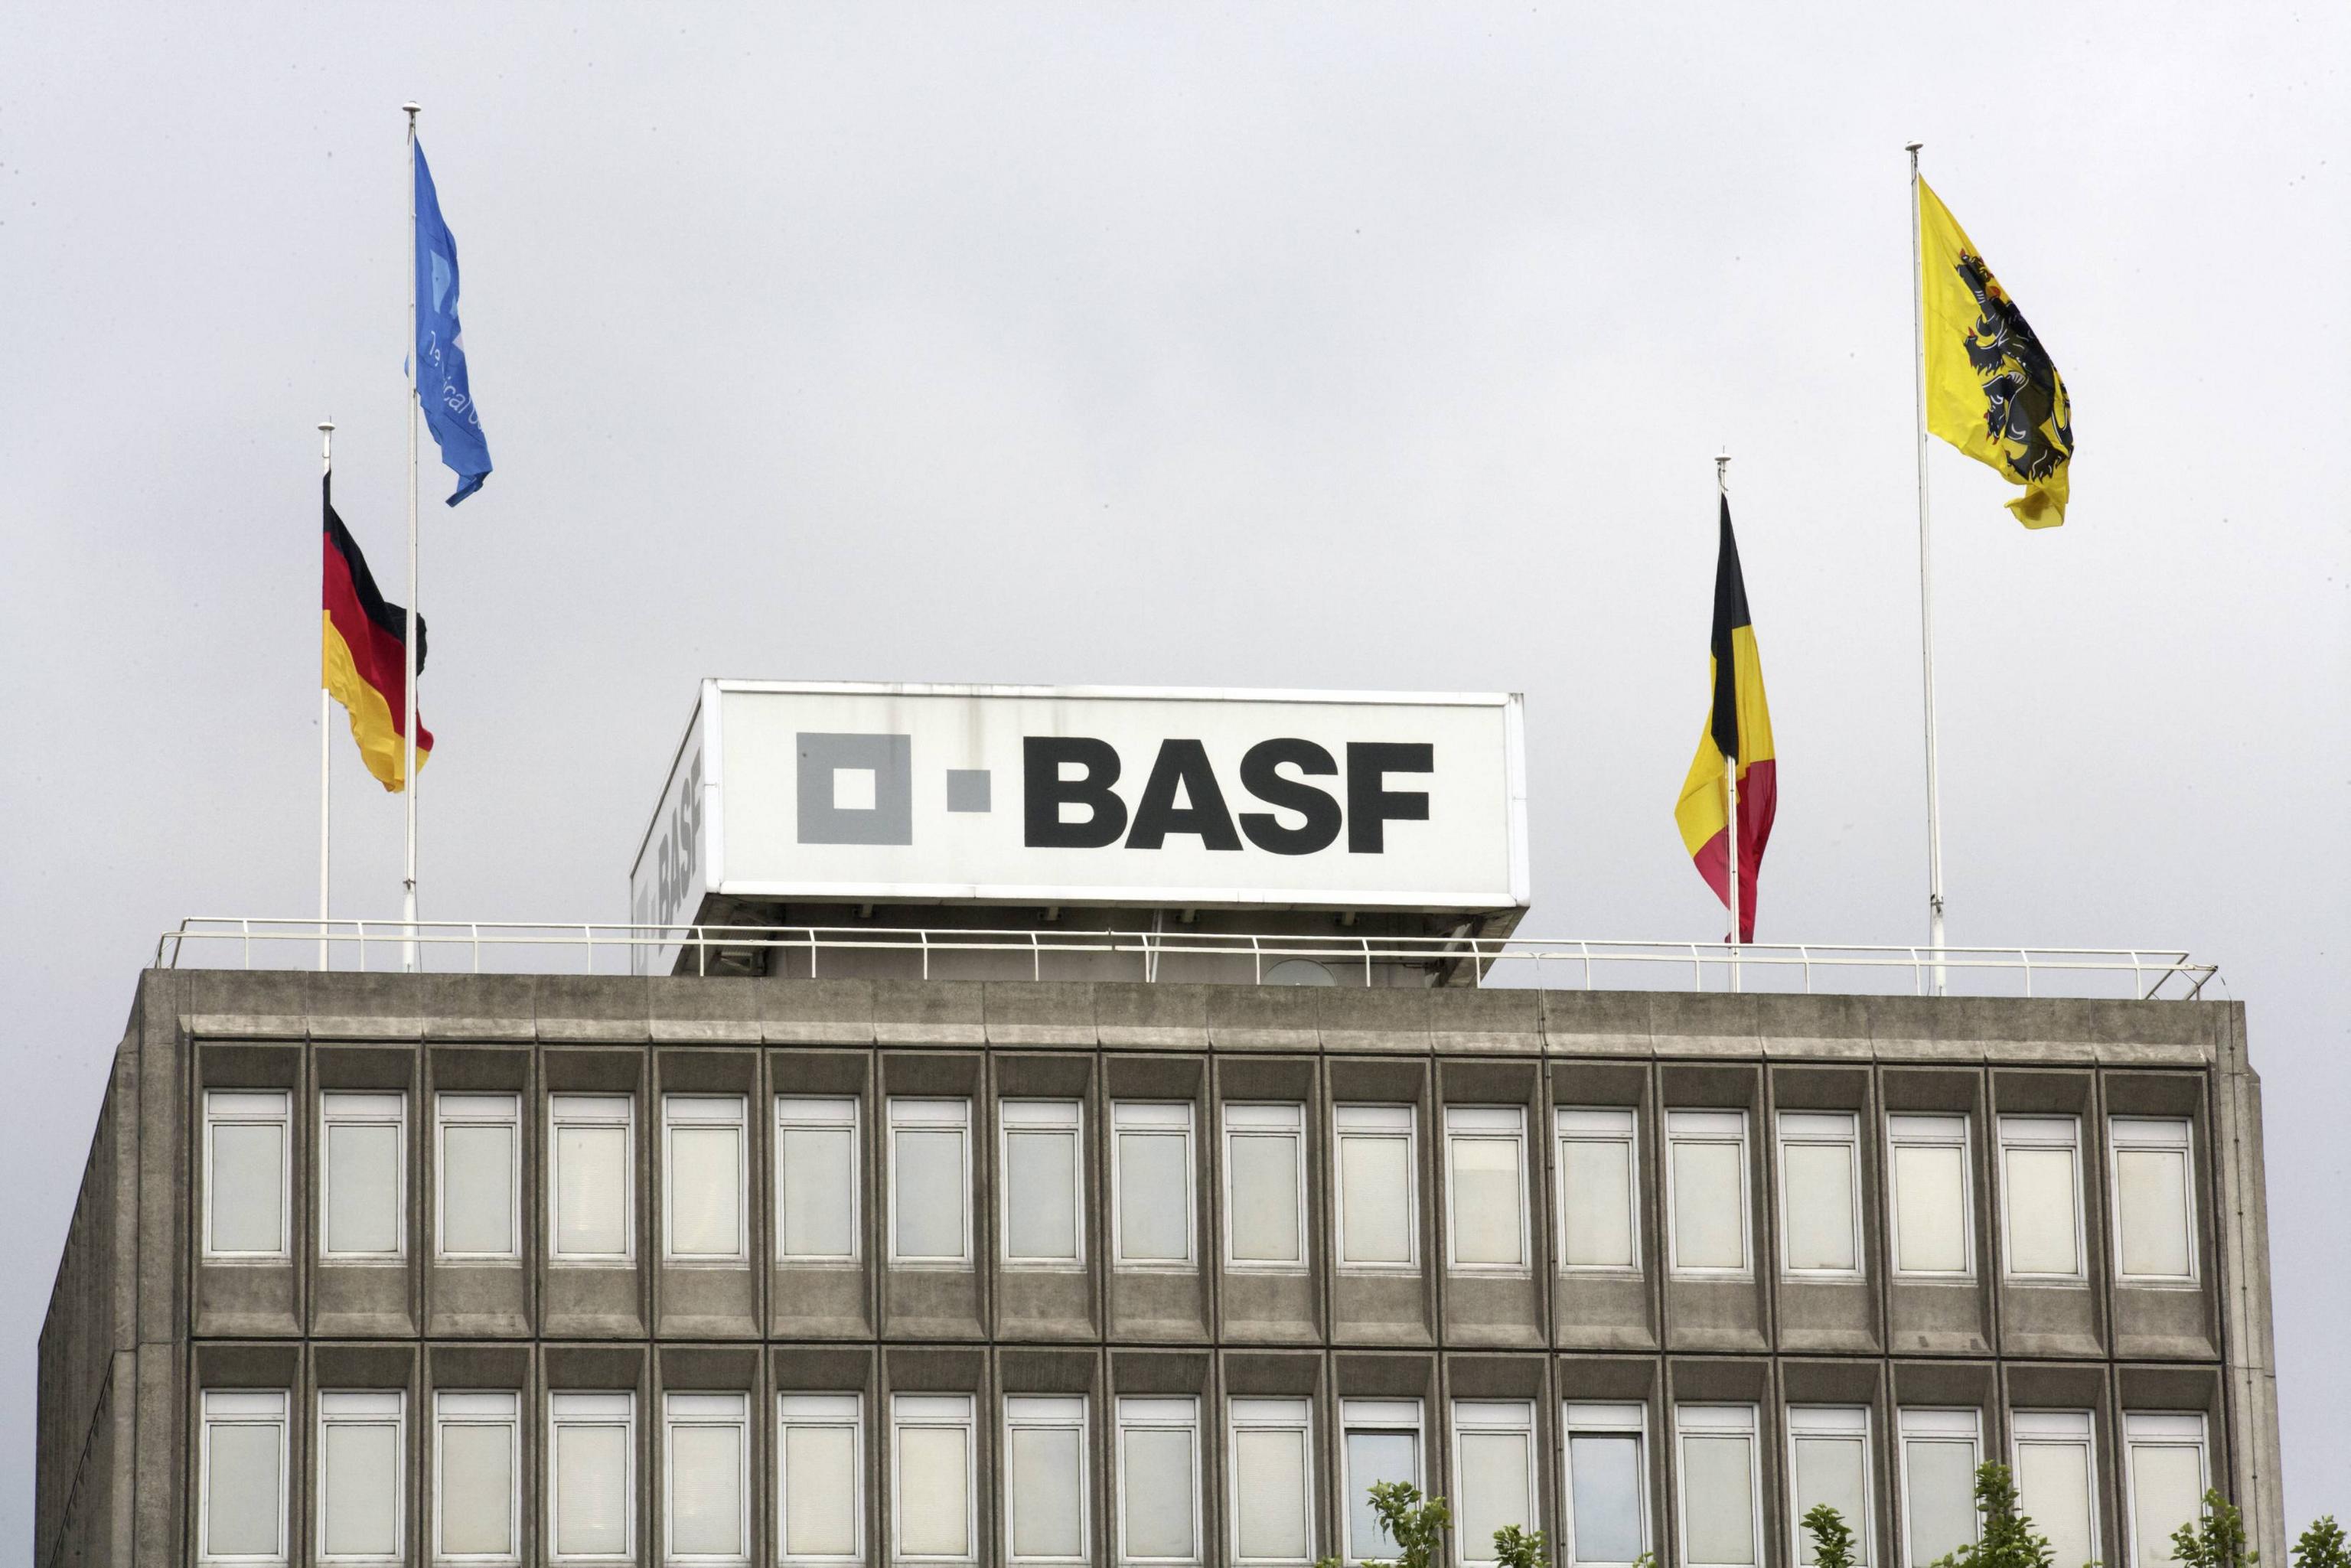 600 Antwerp BASF staff exchange car for bicycle